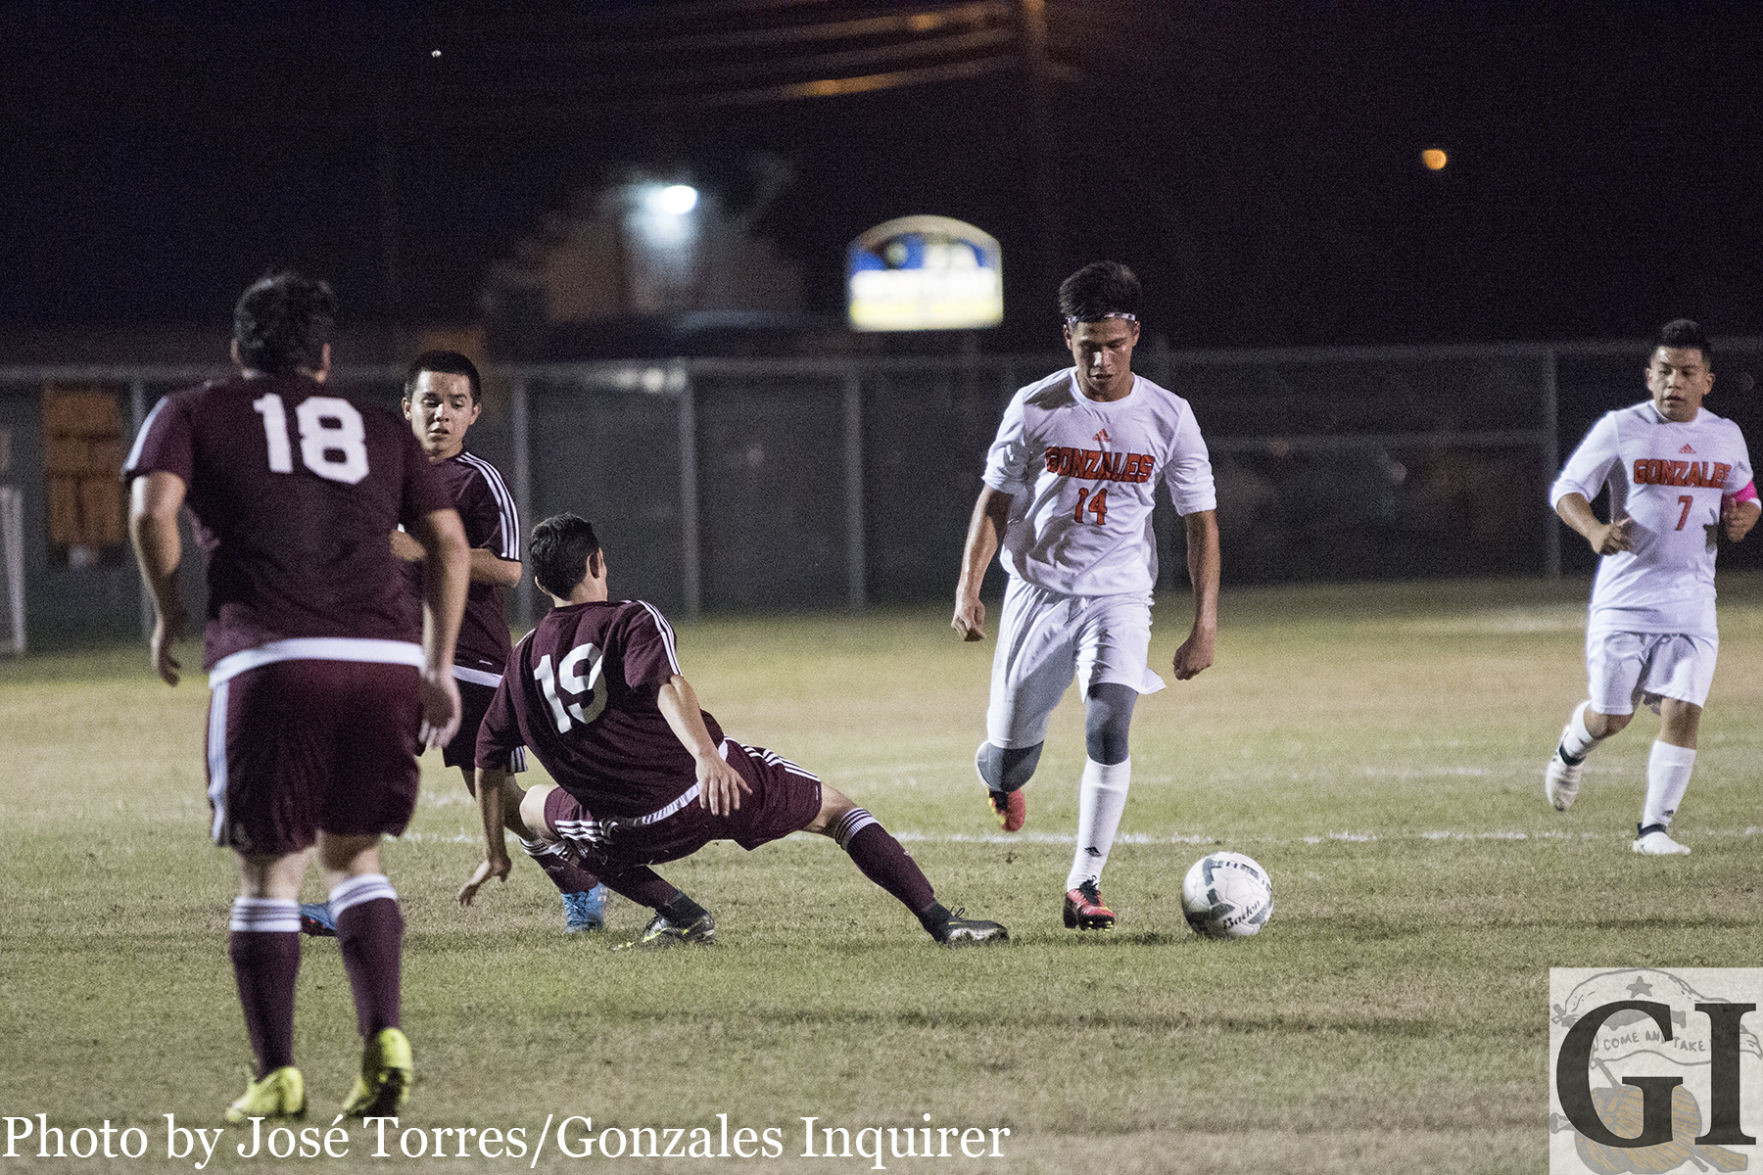 Rogelio Sanchez (14) dribbles down into the box in Gonzales’ 9-1 victory over Floresville. Sanchez came away with a goal.